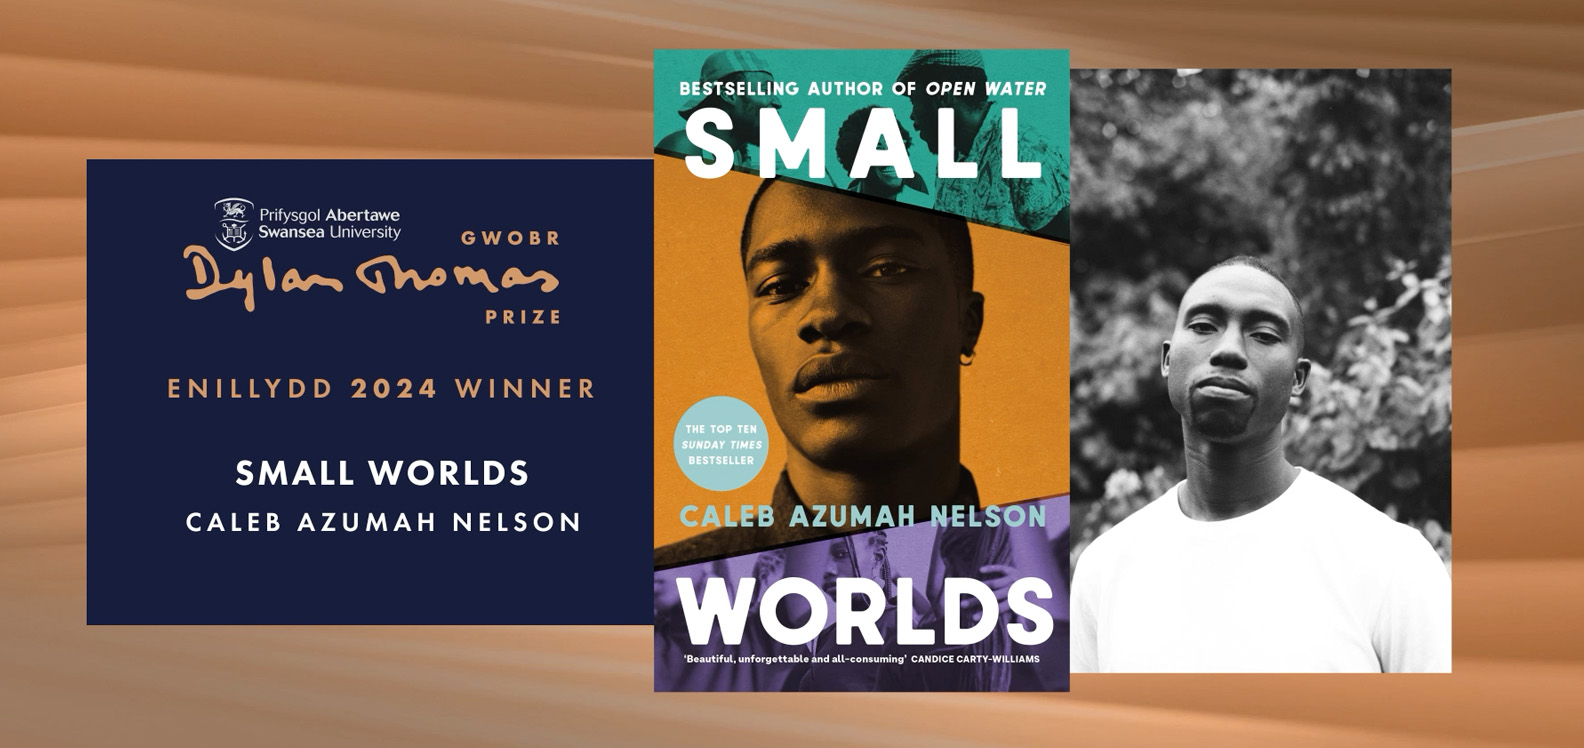 Caleb Azumah Nelson and the cover of Small Worlds